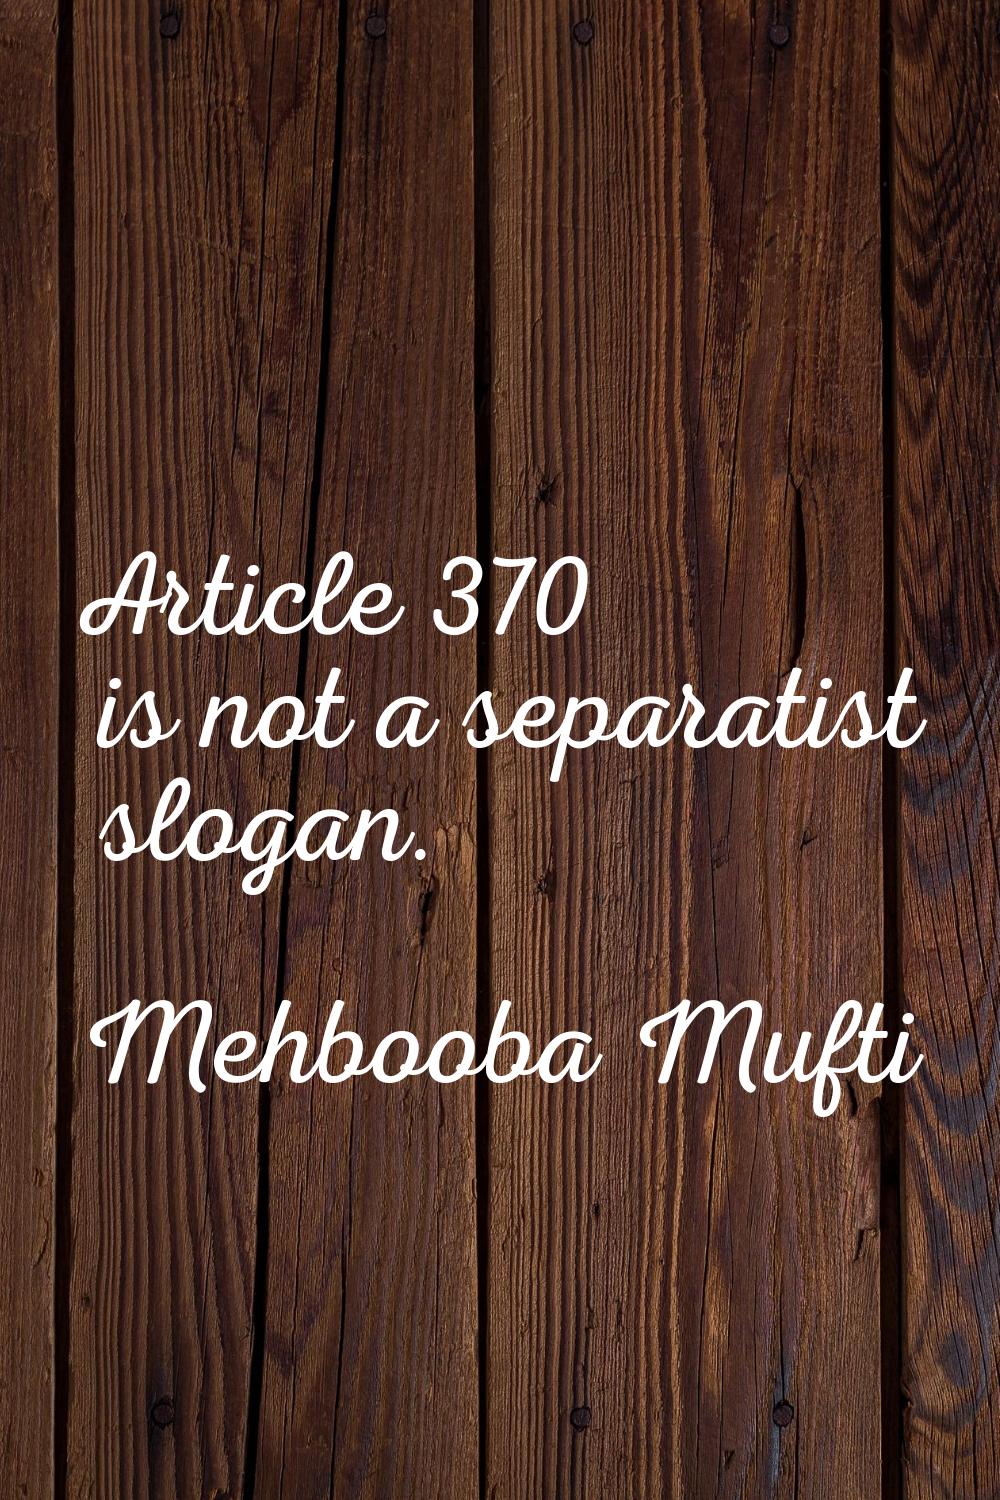 Article 370 is not a separatist slogan.